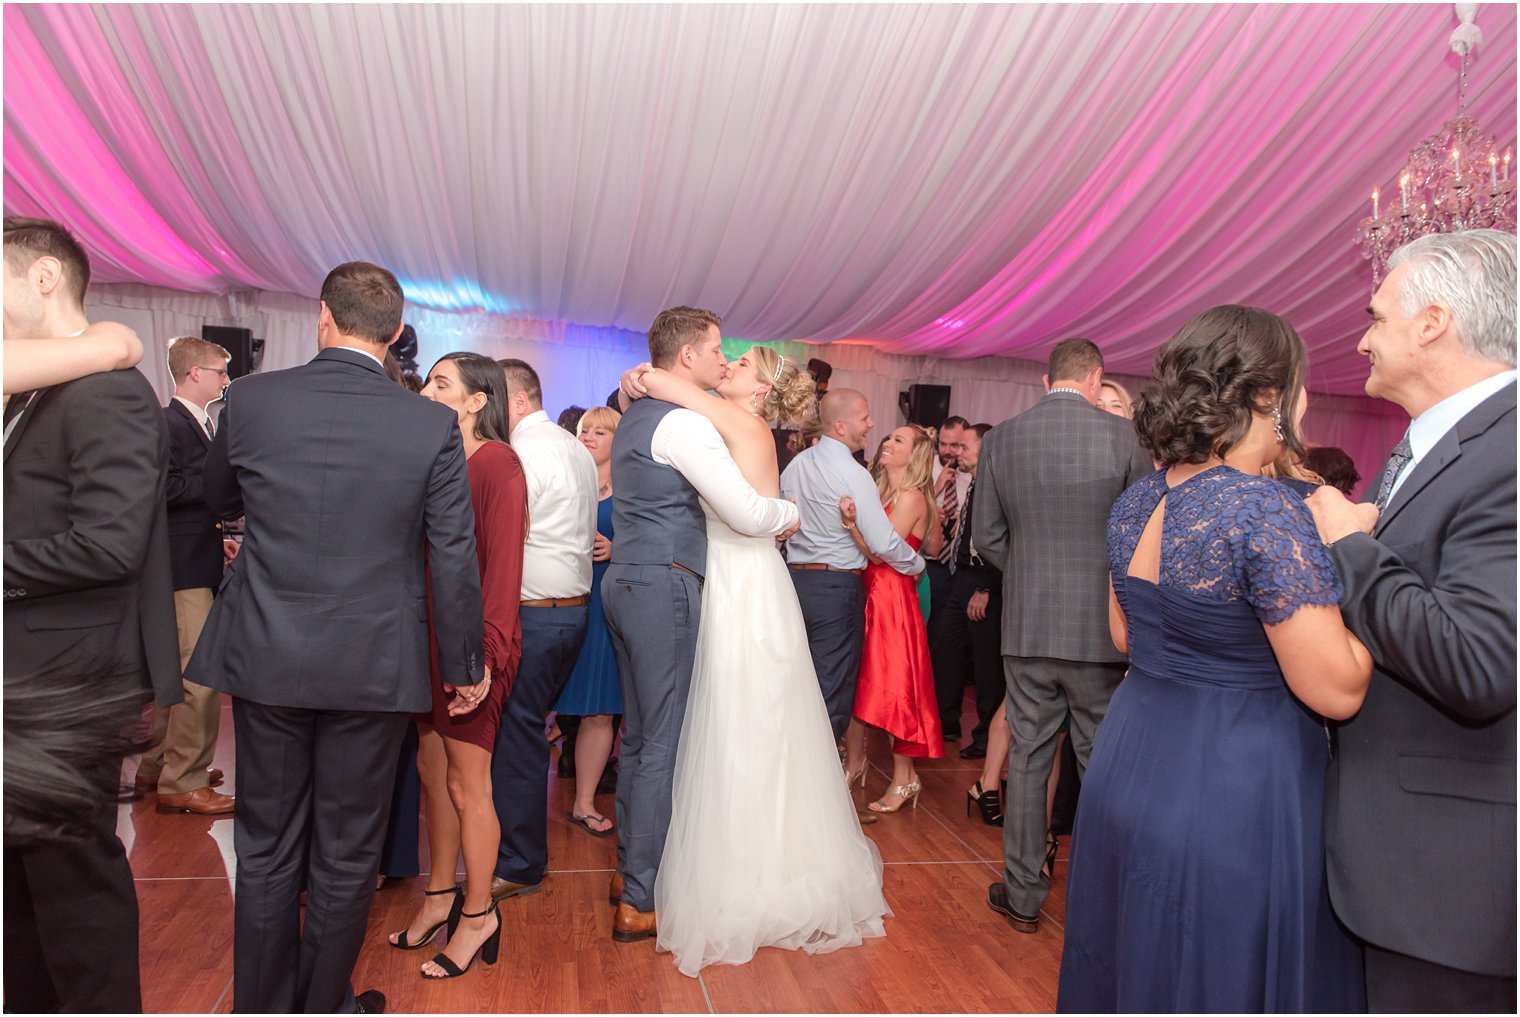 Bride and groom dancing at Windows on the Water at Frogbridge tented wedding reception